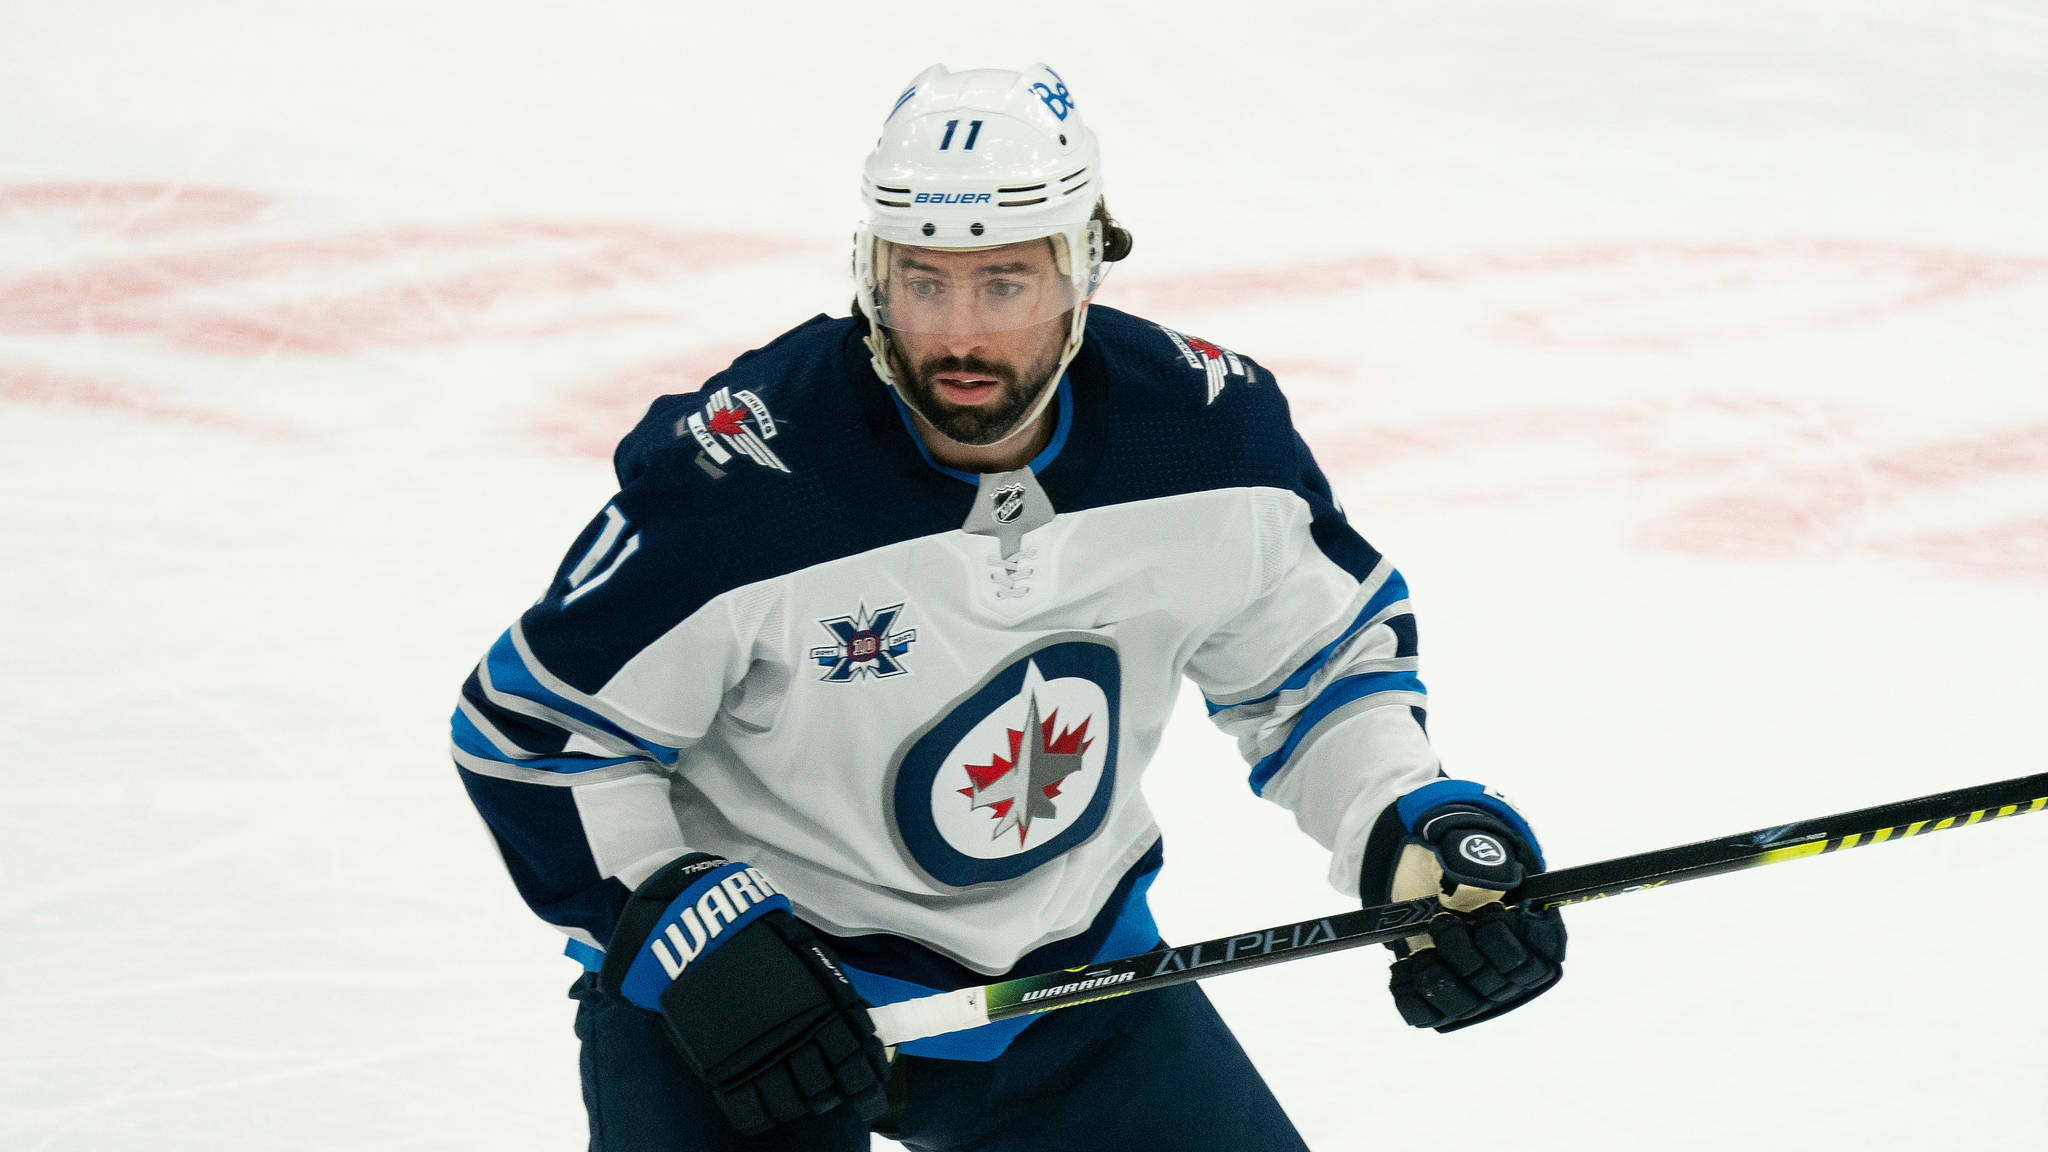 Winnipeg Jets center Nate Thompson (11) during an NHL hockey game against the Toronto Maple Leafs on Thursday, April 15, 2021, in Toronto, Canada. (AP Photo/Peter Power)